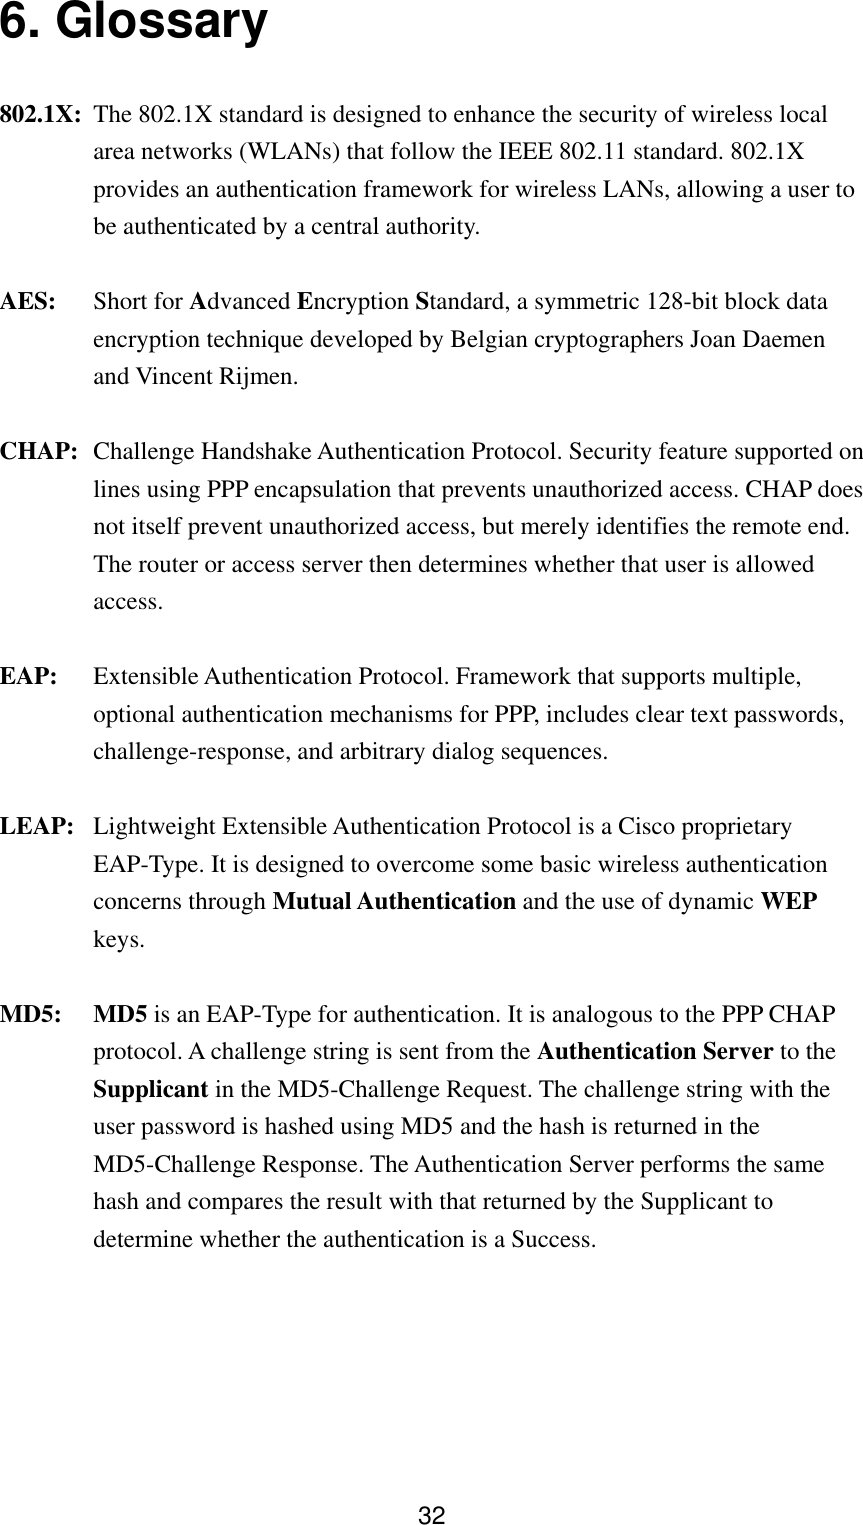  326. Glossary   802.1X: The 802.1X standard is designed to enhance the security of wireless local area networks (WLANs) that follow the IEEE 802.11 standard. 802.1X provides an authentication framework for wireless LANs, allowing a user to be authenticated by a central authority.   AES: Short for Advanced Encryption Standard, a symmetric 128-bit block data encryption technique developed by Belgian cryptographers Joan Daemen and Vincent Rijmen. CHAP:  Challenge Handshake Authentication Protocol. Security feature supported on lines using PPP encapsulation that prevents unauthorized access. CHAP does not itself prevent unauthorized access, but merely identifies the remote end. The router or access server then determines whether that user is allowed access. EAP:  Extensible Authentication Protocol. Framework that supports multiple, optional authentication mechanisms for PPP, includes clear text passwords, challenge-response, and arbitrary dialog sequences. LEAP:  Lightweight Extensible Authentication Protocol is a Cisco proprietary EAP-Type. It is designed to overcome some basic wireless authentication concerns through Mutual Authentication and the use of dynamic WEP keys. MD5: MD5 is an EAP-Type for authentication. It is analogous to the PPP CHAP protocol. A challenge string is sent from the Authentication Server to the Supplicant in the MD5-Challenge Request. The challenge string with the user password is hashed using MD5 and the hash is returned in the MD5-Challenge Response. The Authentication Server performs the same hash and compares the result with that returned by the Supplicant to determine whether the authentication is a Success. 